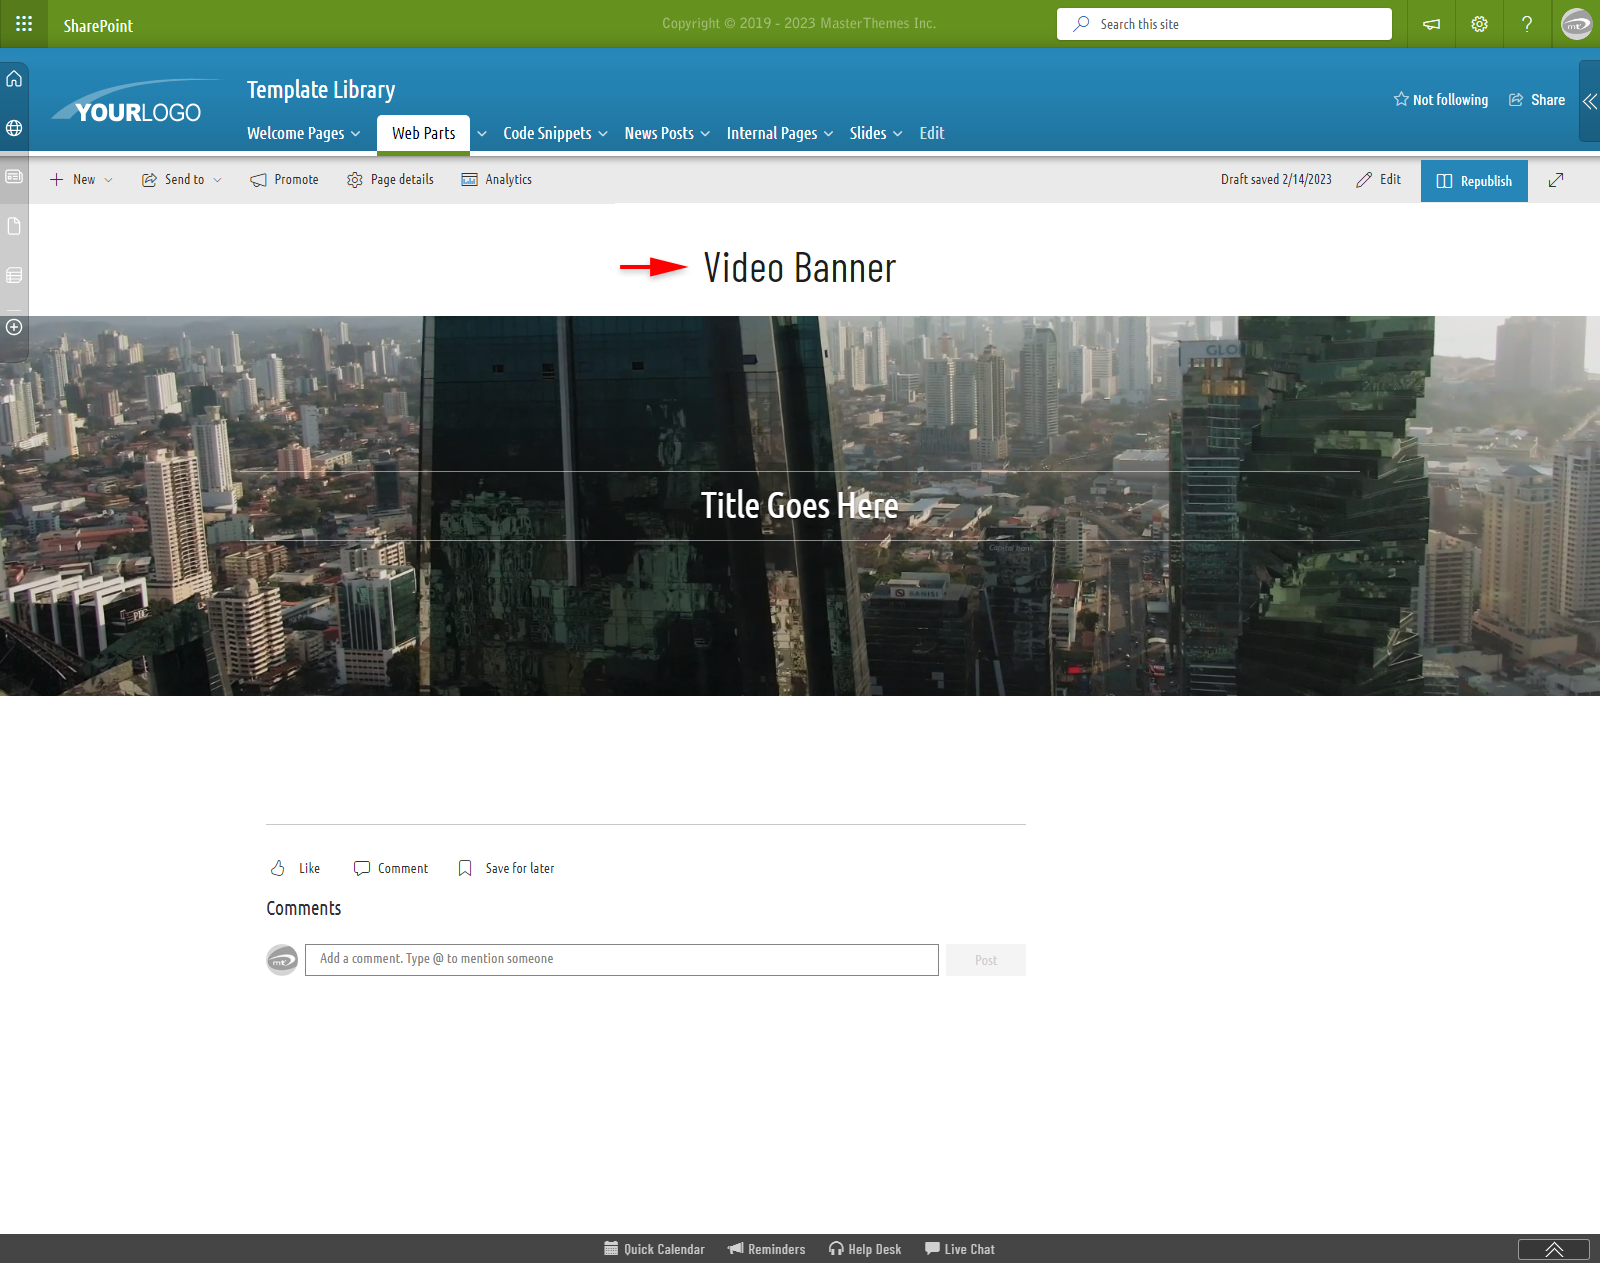 Sharepoint Templates and SharePoint Themes for Modern Intranet. Intranet Templates and Web Parts for SharePoint Online - Office 365